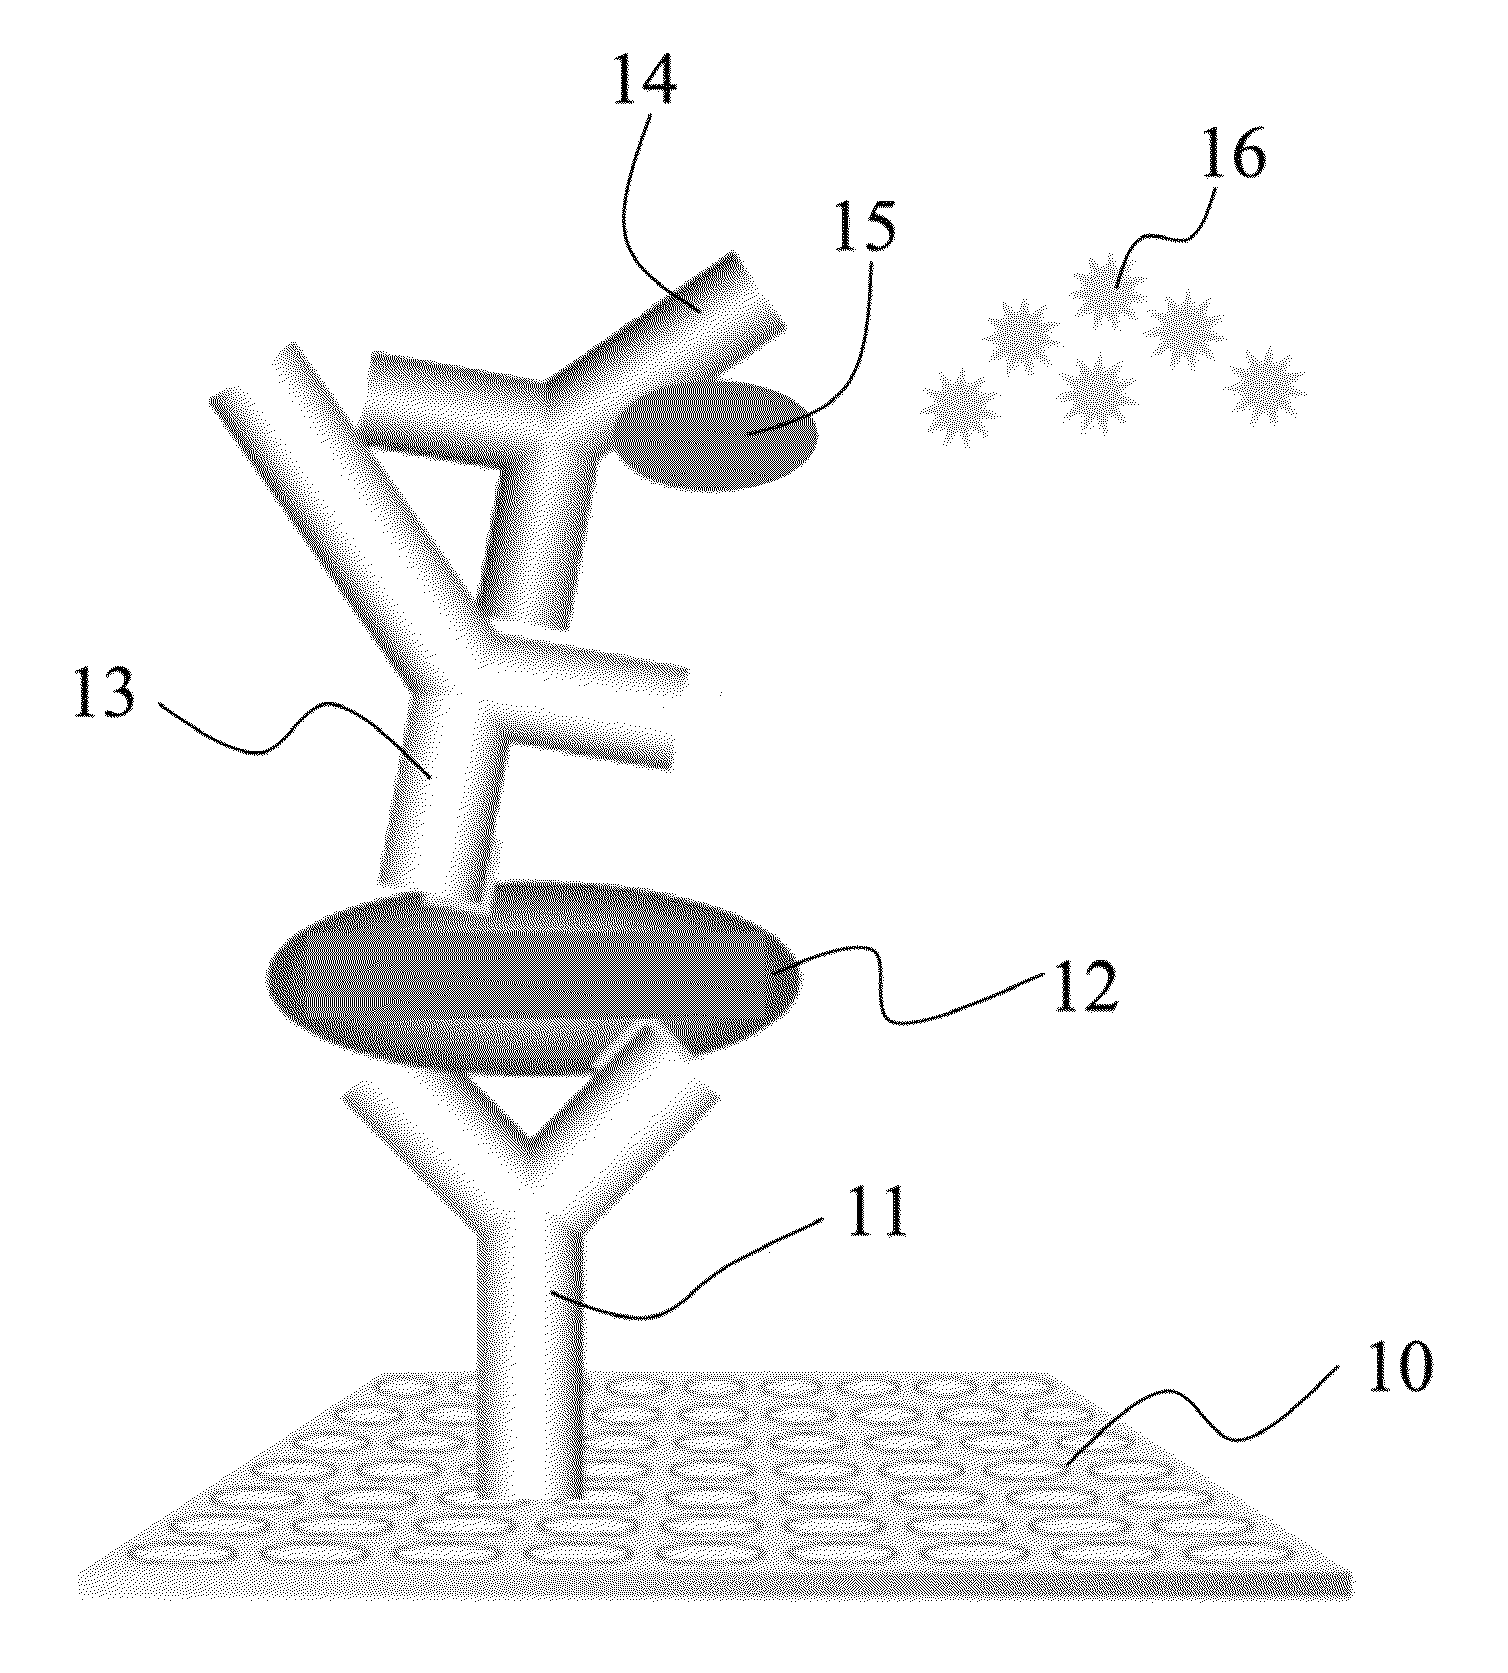 Hybridoma cell line producing monoclonal antibody against foot-and-mouth disease virus, the monoclonal antibody therefrom, immunoassay reagent and kit, and immunoassay method